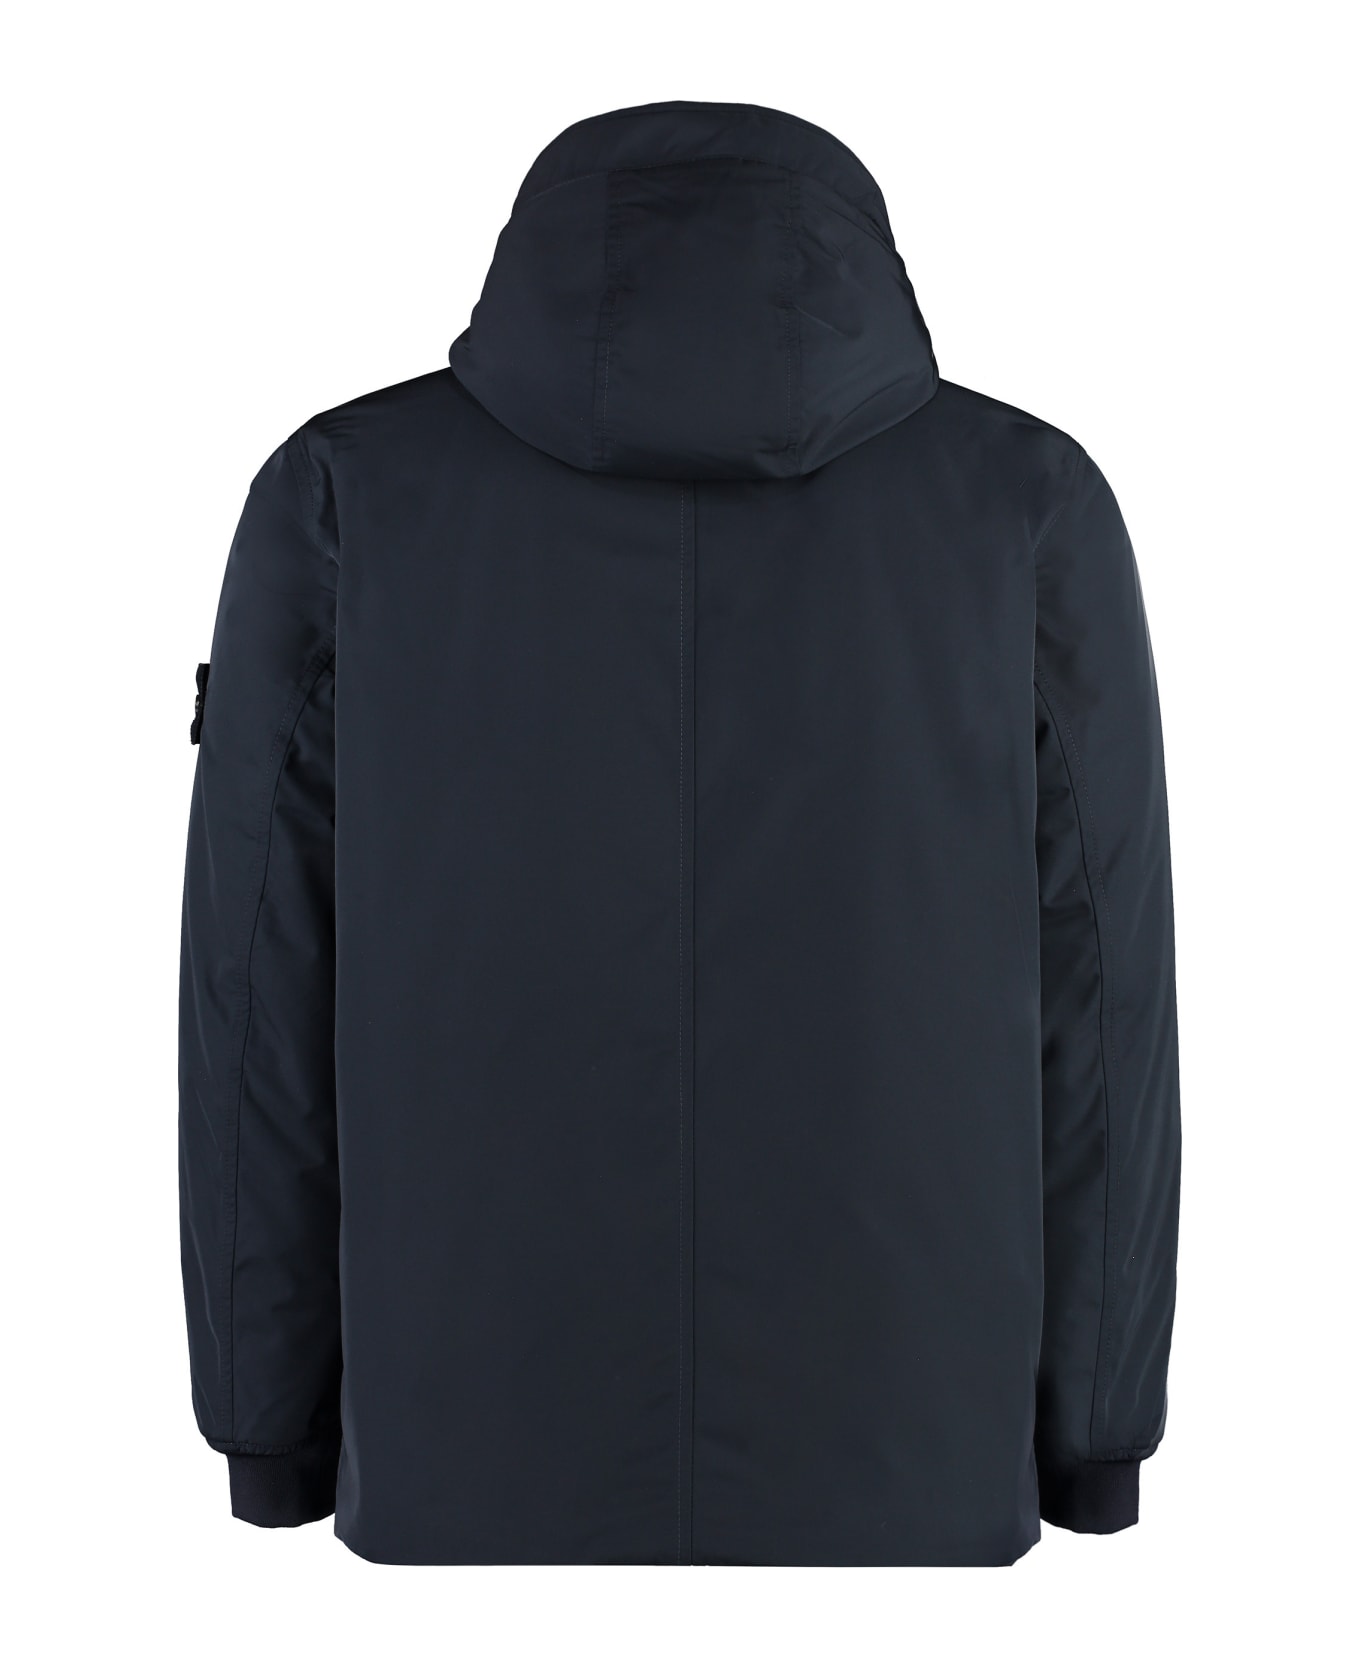 Stone Island Light Soft Shell Check Grid Jacket In Navy Blue - Blue